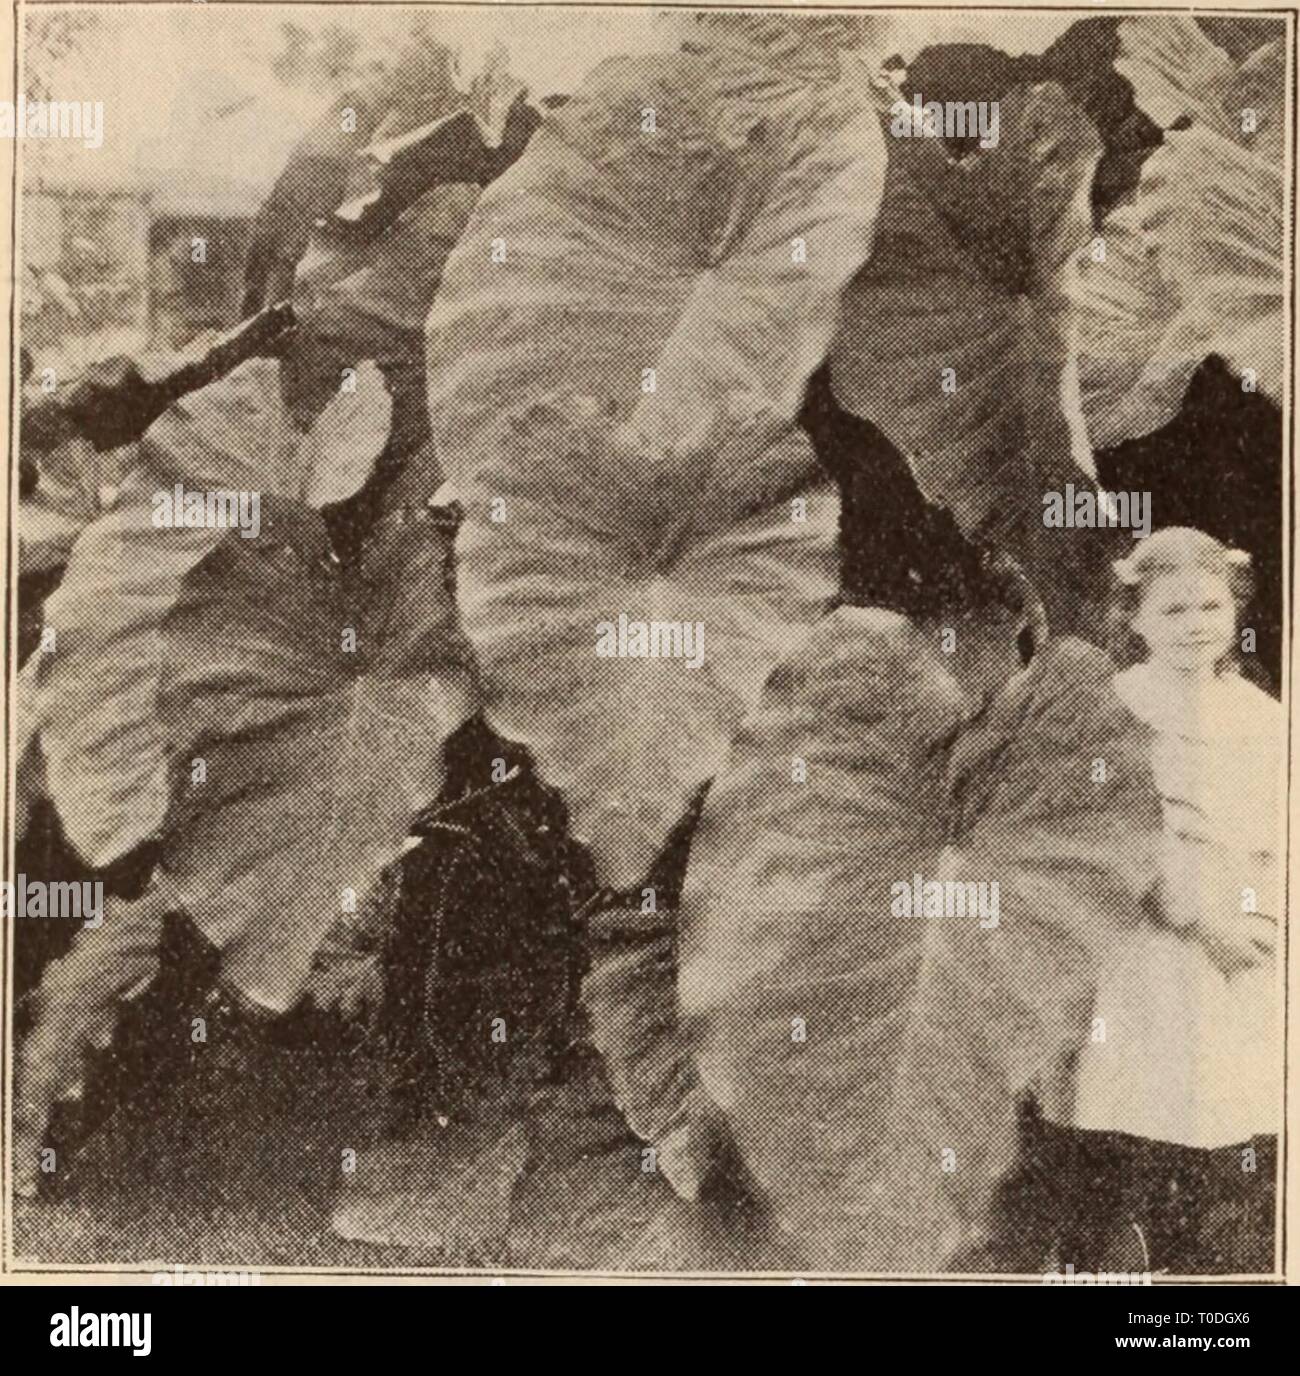 Dreer's wholesale price list  Dreer's wholesale price list / Henry A. Dreer. dreerswholesalep1912dree Year:   SUMMER FLOWERING BULBS    CALADIUM ESCULENTUM (Elephant's Ear) Amaryllis. Each Per doz Nehrling's Florida Hybrids. A magrnificentstrain of 60 $6 00 50 5 00 50 5 00 Pormoslssima $5.00 per 100 06 60 25 2 50 Prince of Orange 40 4 00 R. H. James, Dazzling scarlet, feathered with white 75 7 50 50 5 00 Vlttata Hybrids 30 3 00 Williamsi 35 3 50 Amorphophallus. Rivieri. Strong bulbs 30 3 00 TuberouS'^rooted Begonias. We handle the very finest strain that money can buy being grown for us by a n Stock Photo